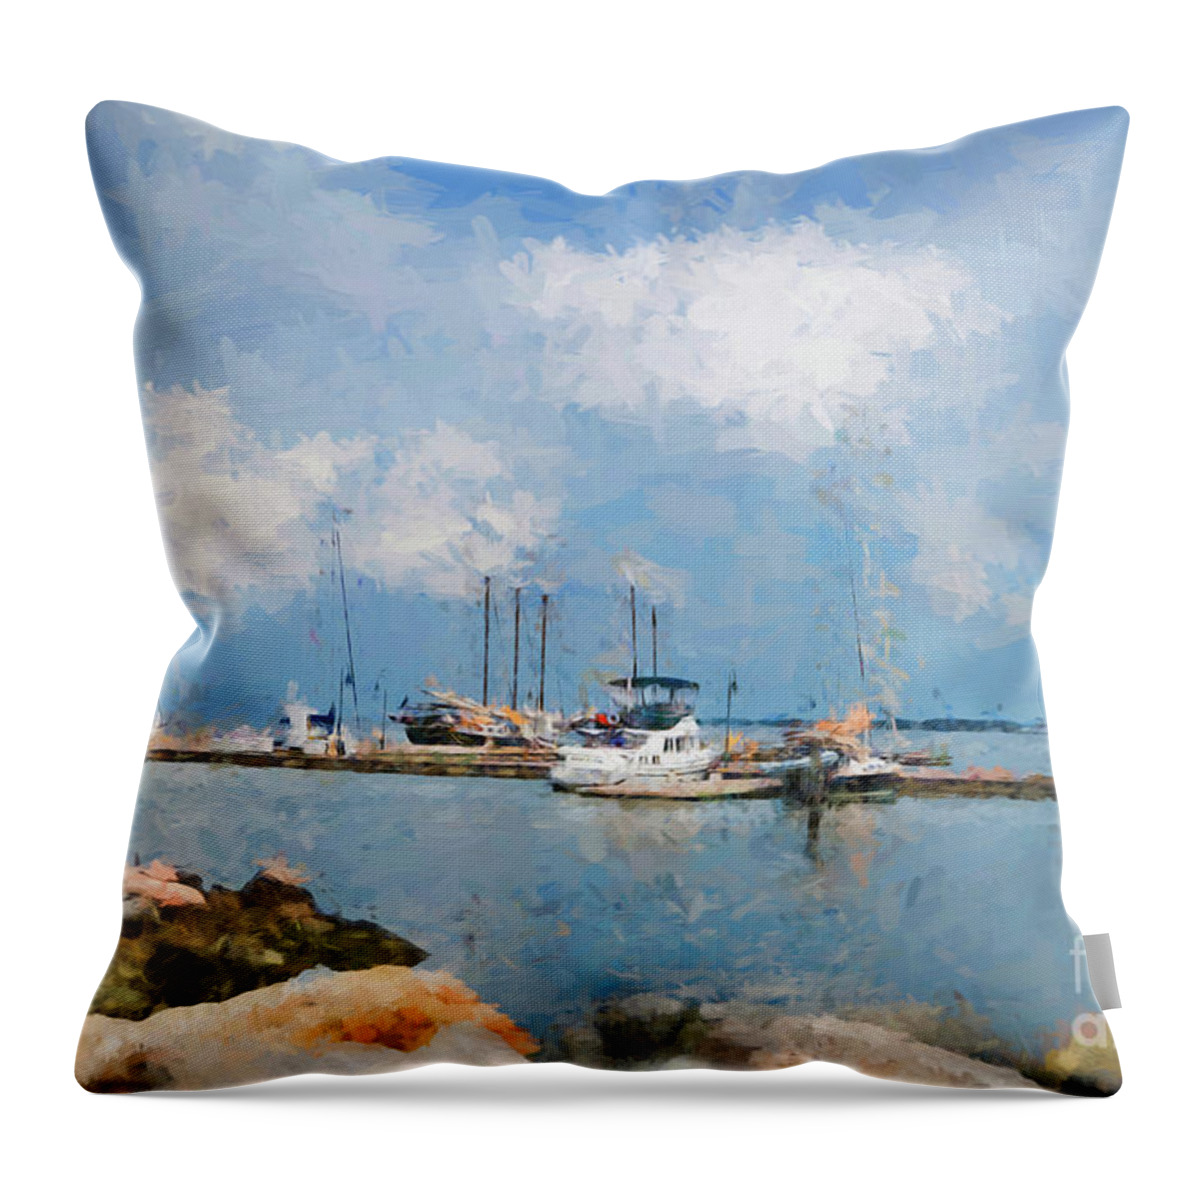 Sea Throw Pillow featuring the digital art Small Dock with Boats by Ed Taylor